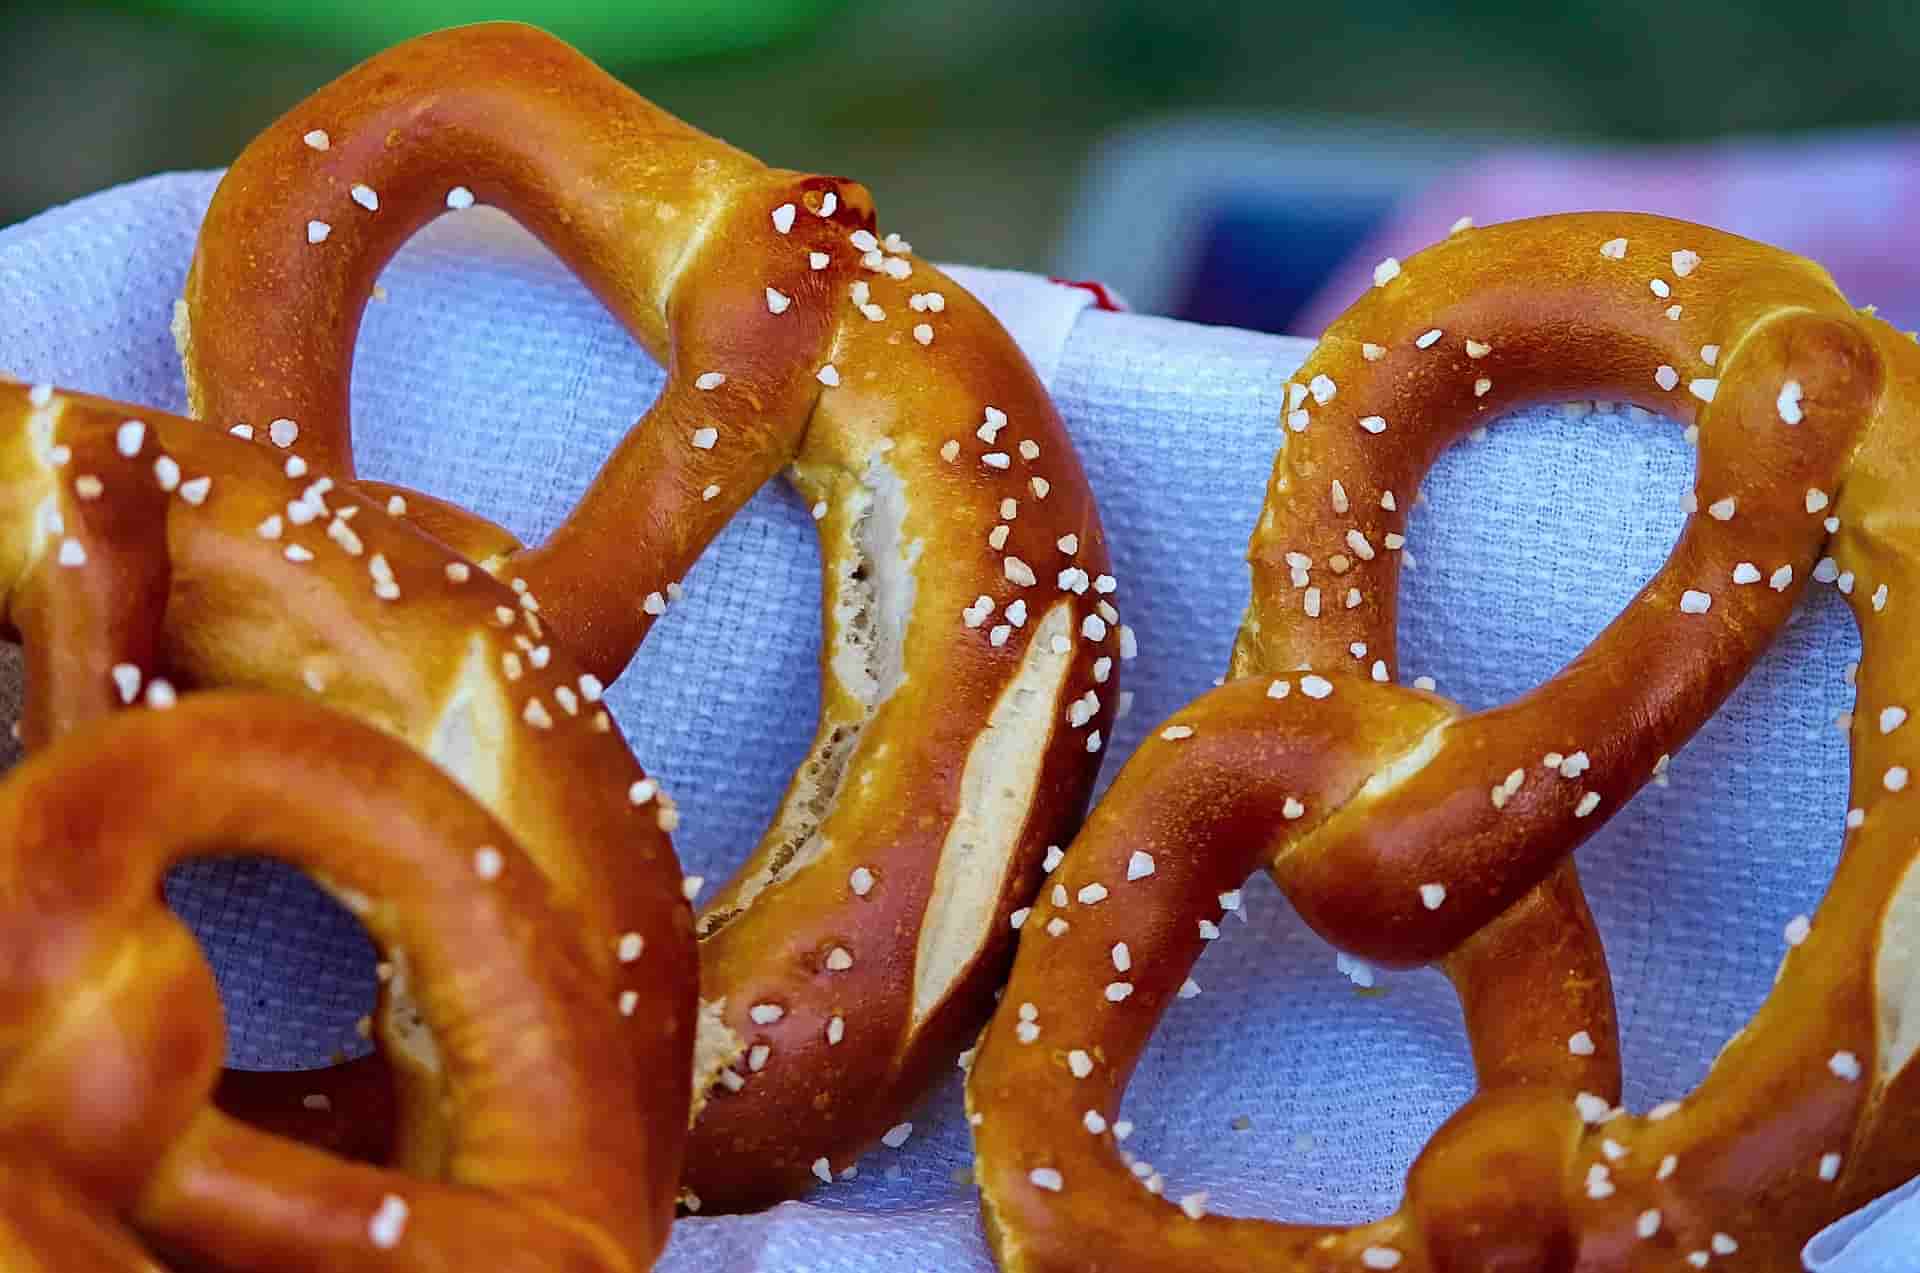 pretzels_drinking beer for breakfast_my life in germany-min